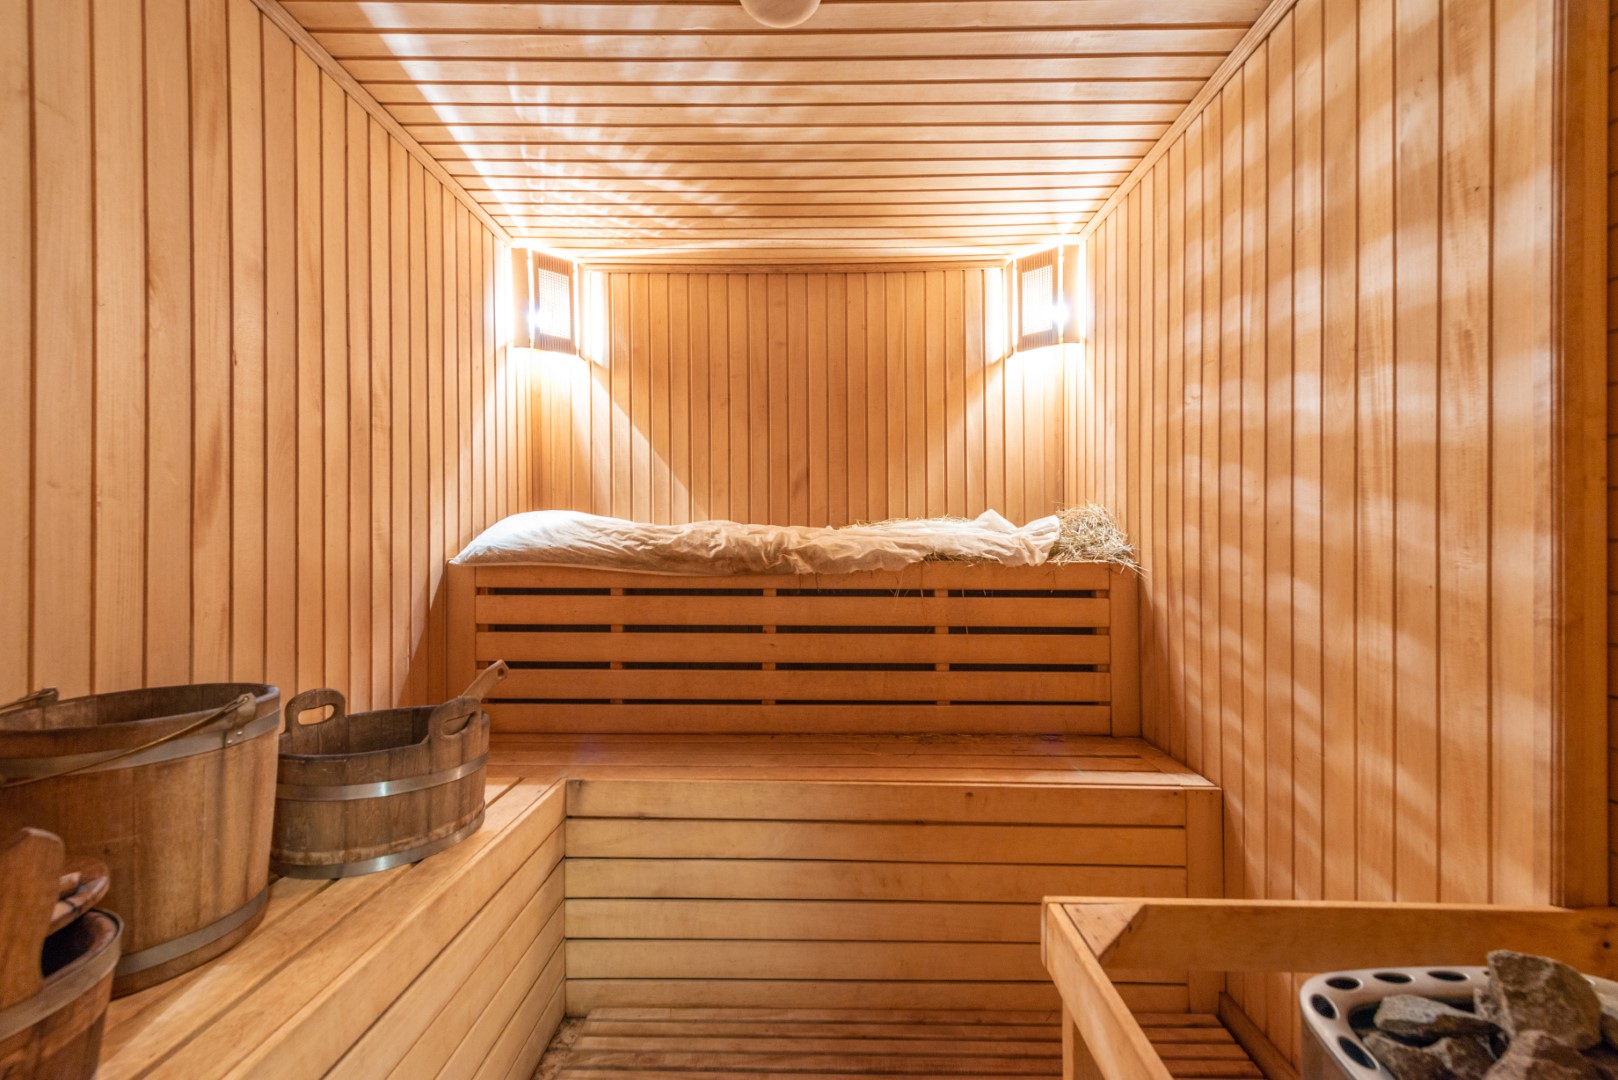 A True German Spa Experience Everything you need to know about the German Sauna Baths picture picture